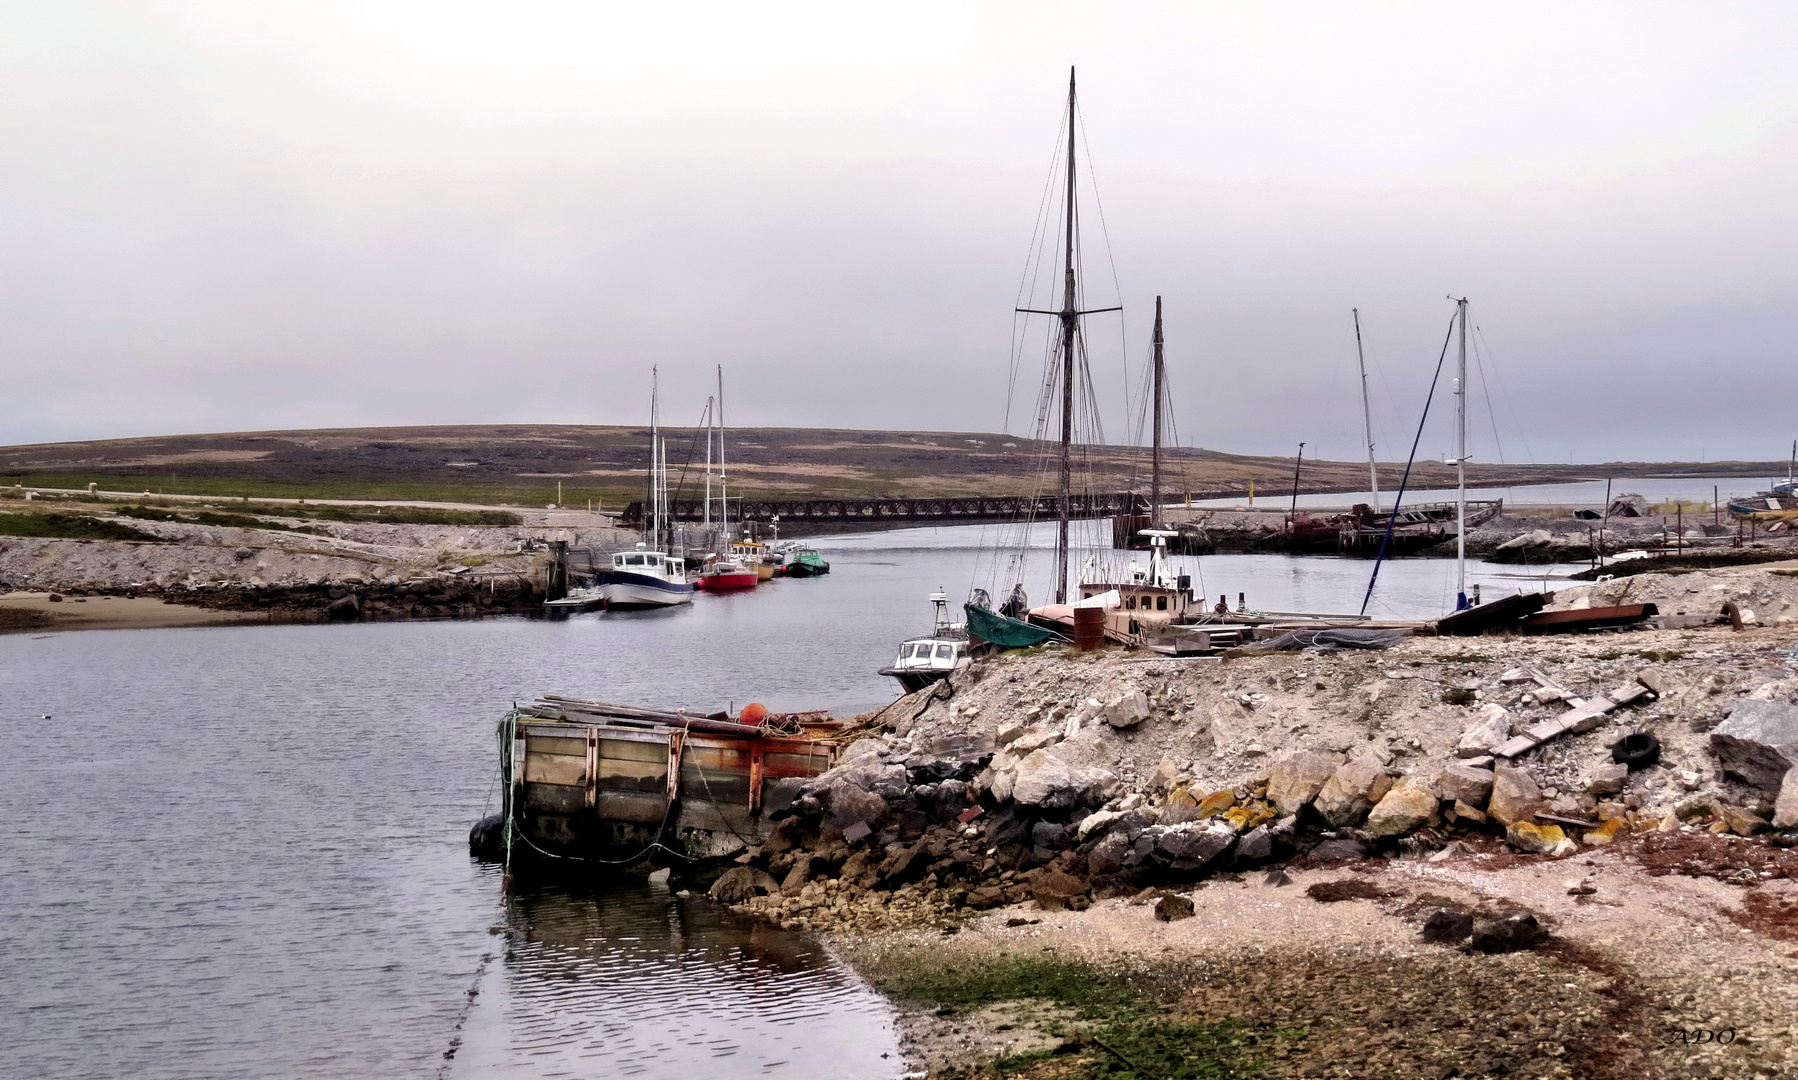 On the Shore in Stanley - Falklands/Malvinas